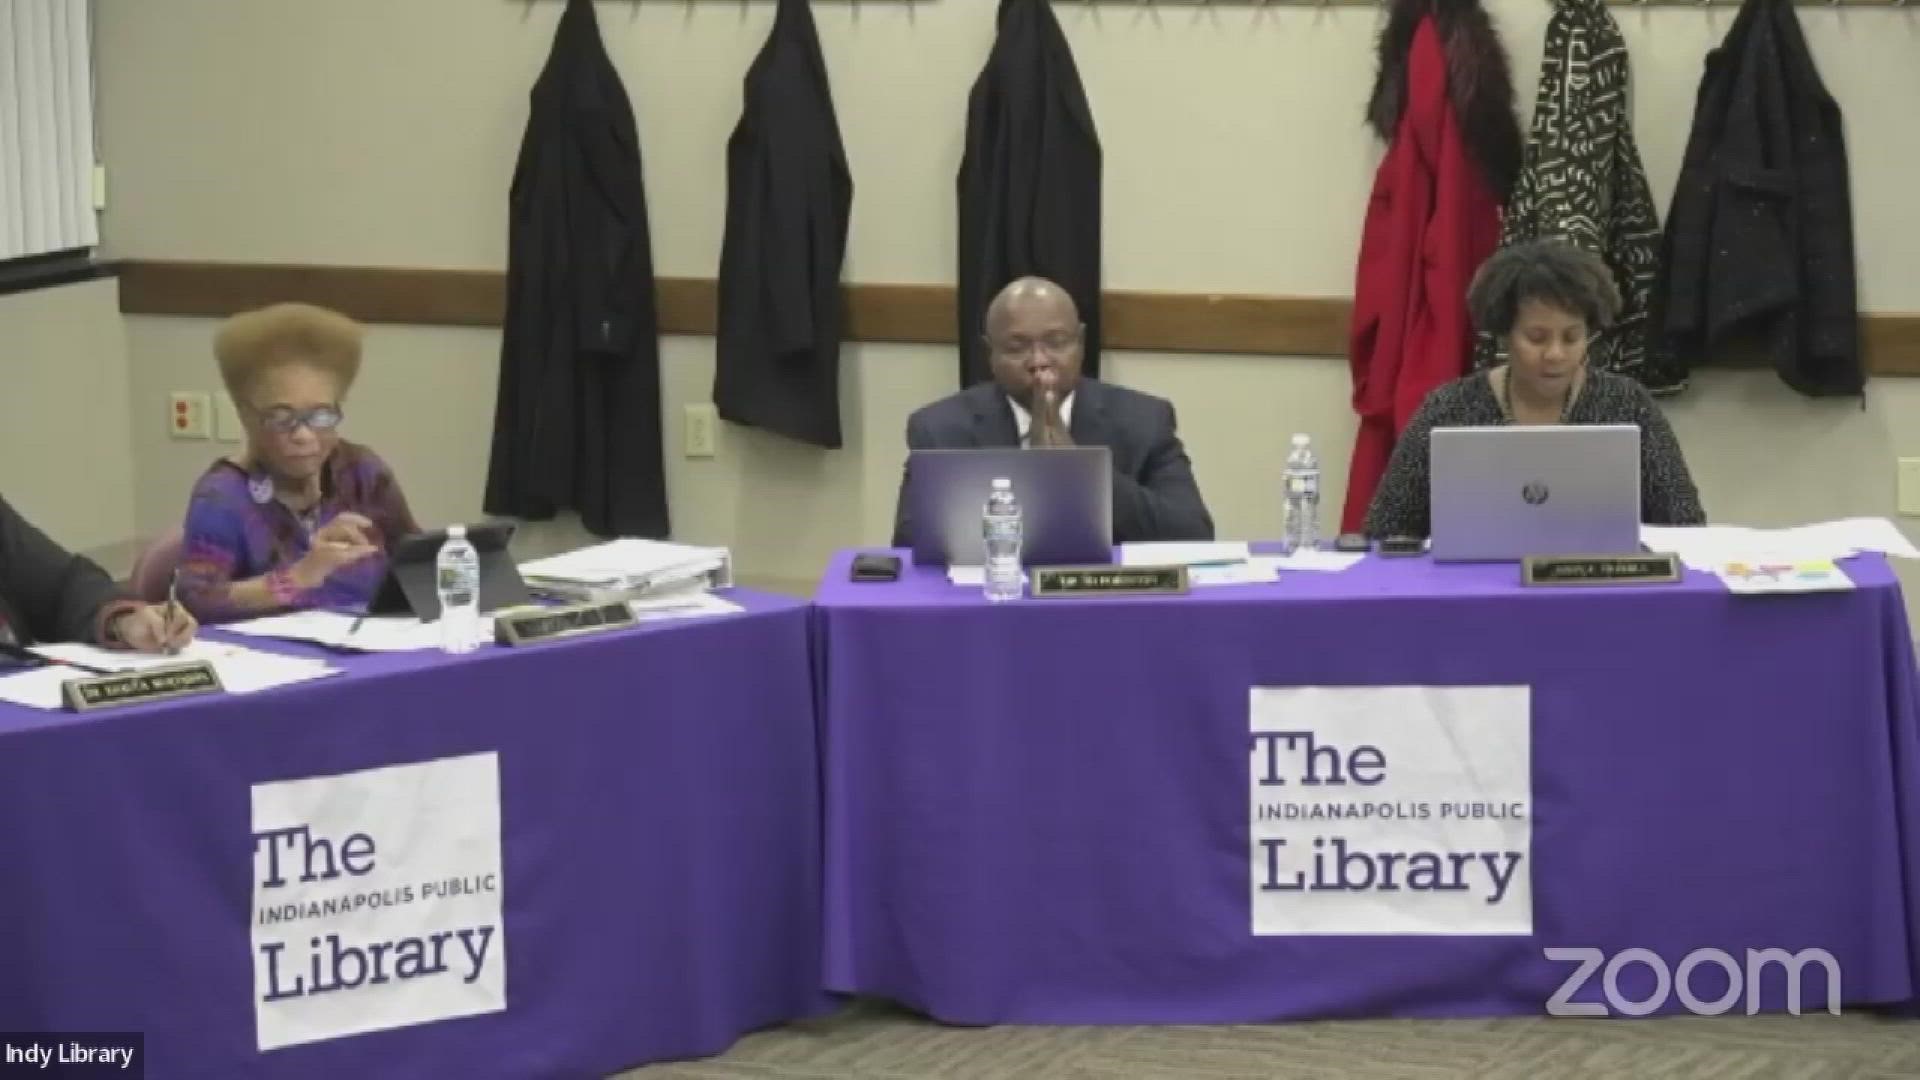 The search for a new Indianapolis Public Library CEO continues after a very tense board meeting Monday night.